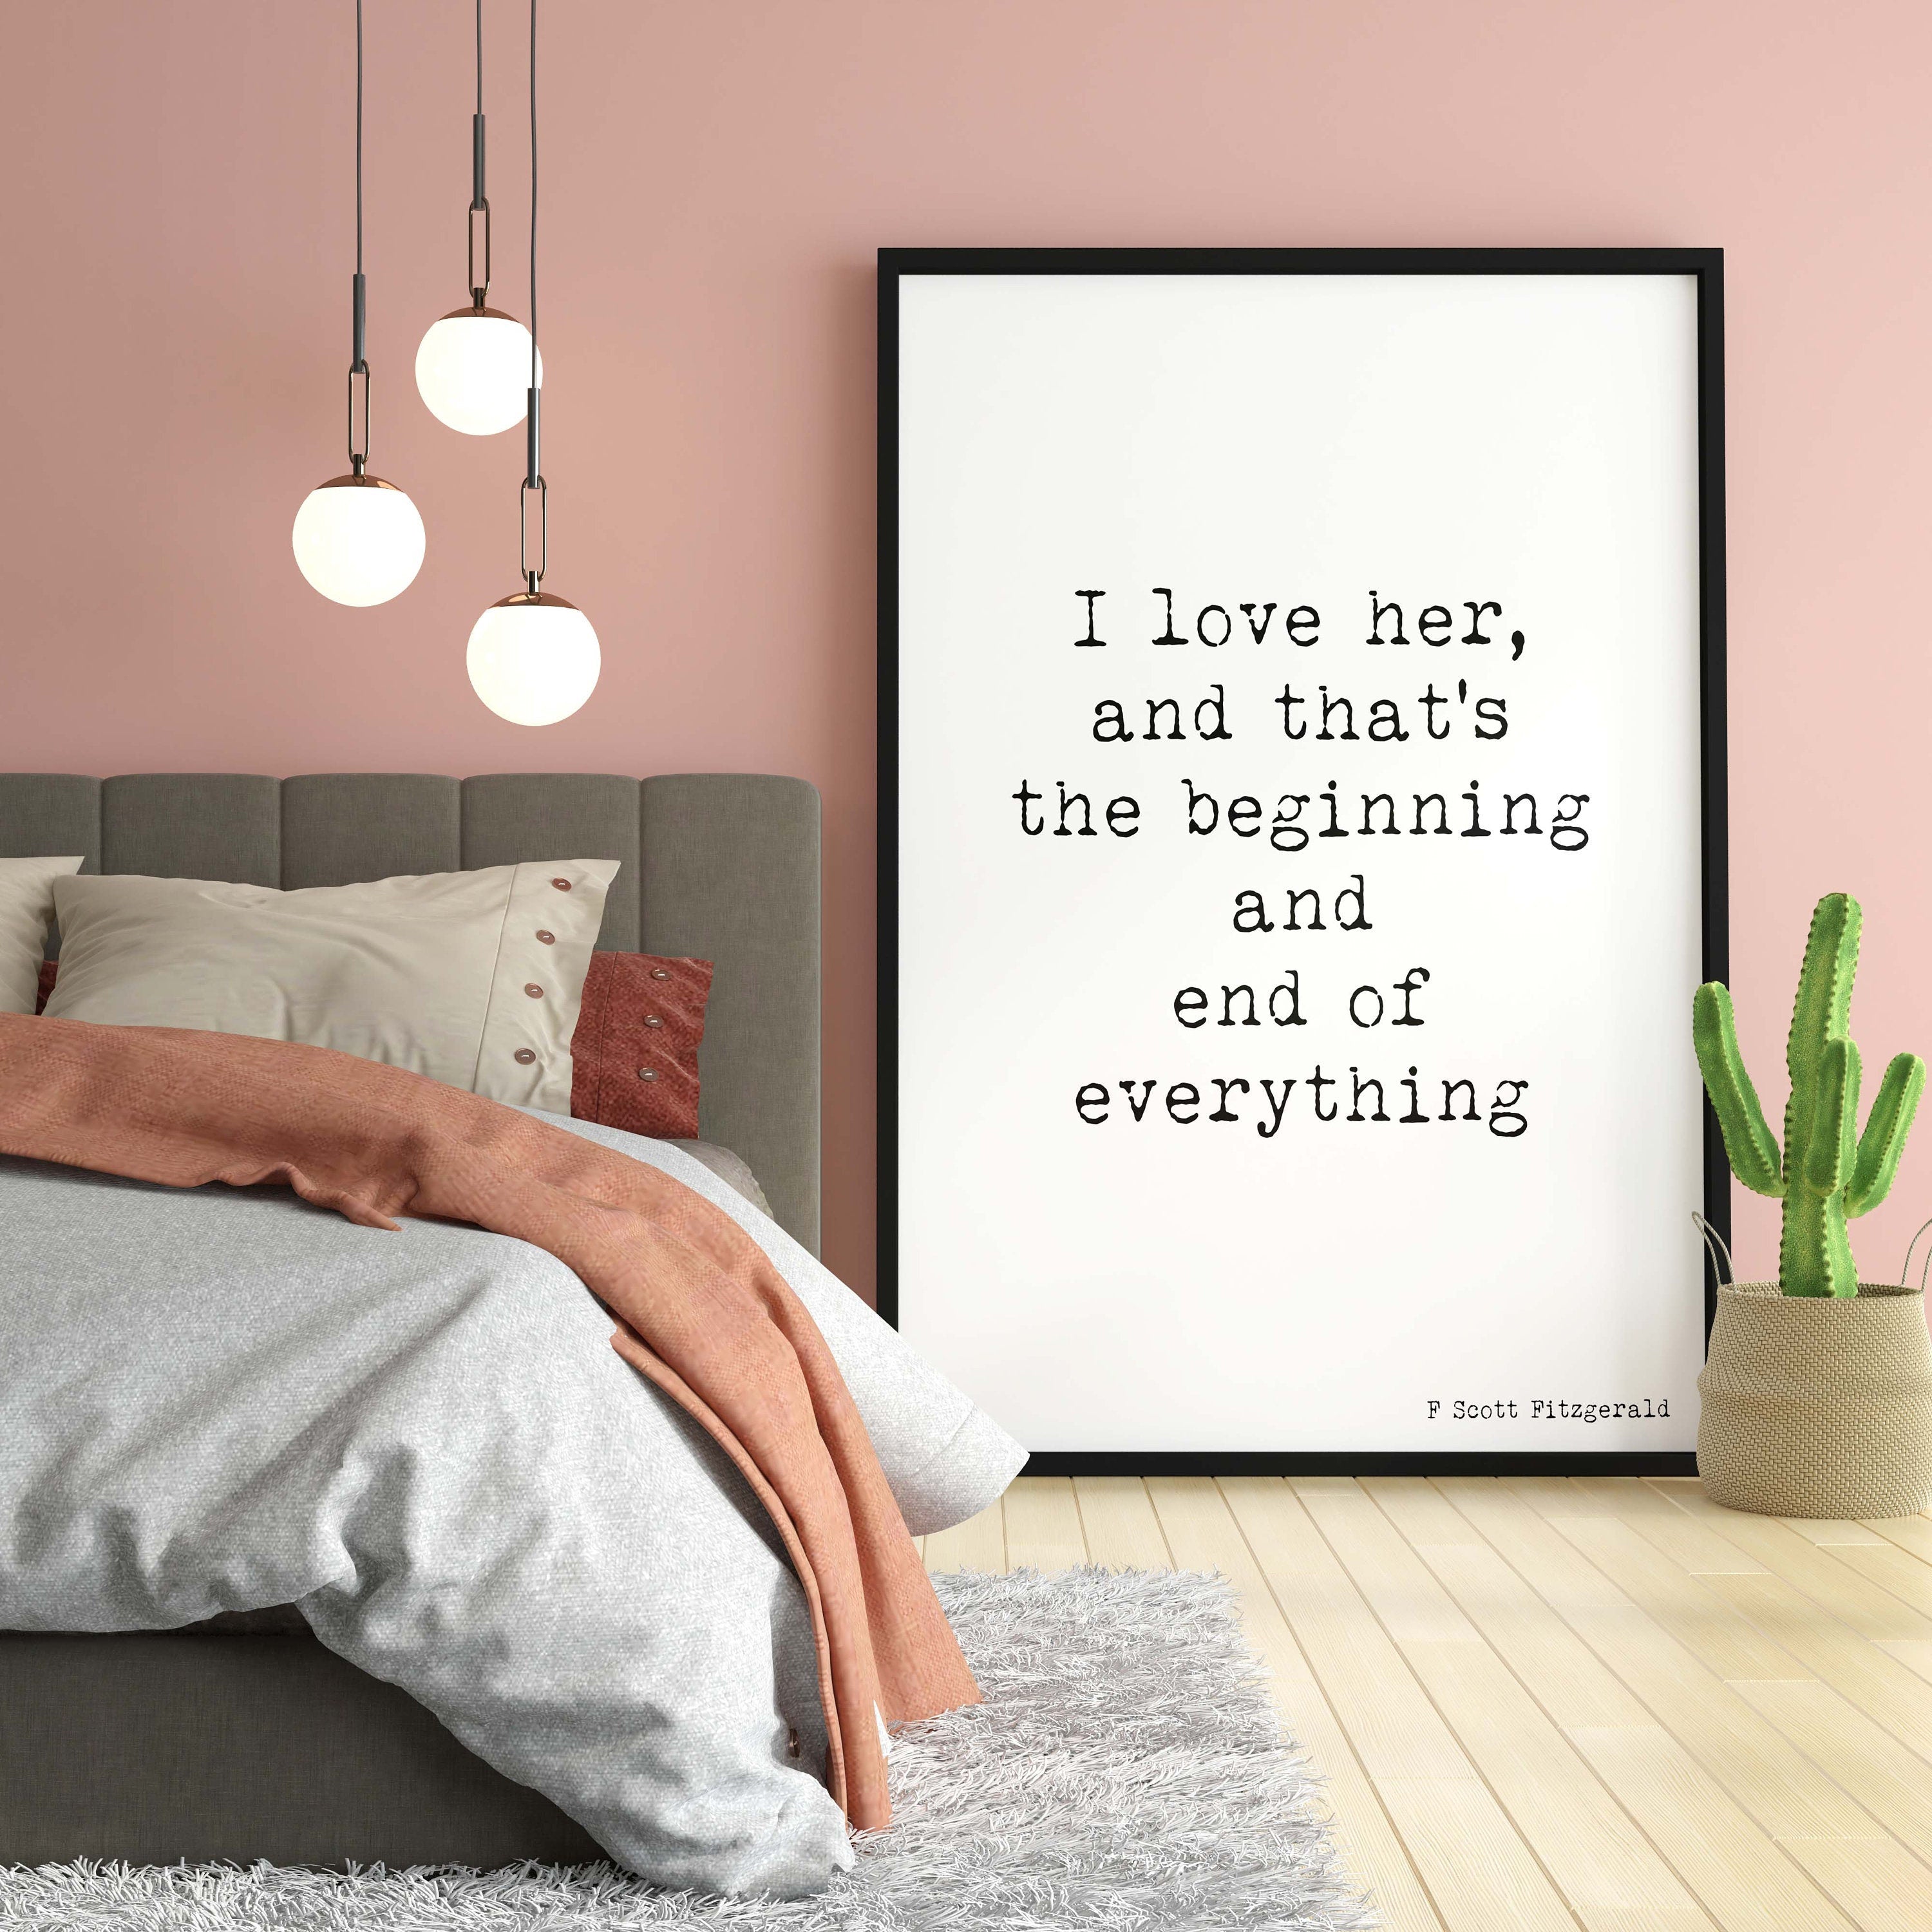 F Scott Fitzgerald Quote Print, I Love Her and That's The Beginning and End Of Everything